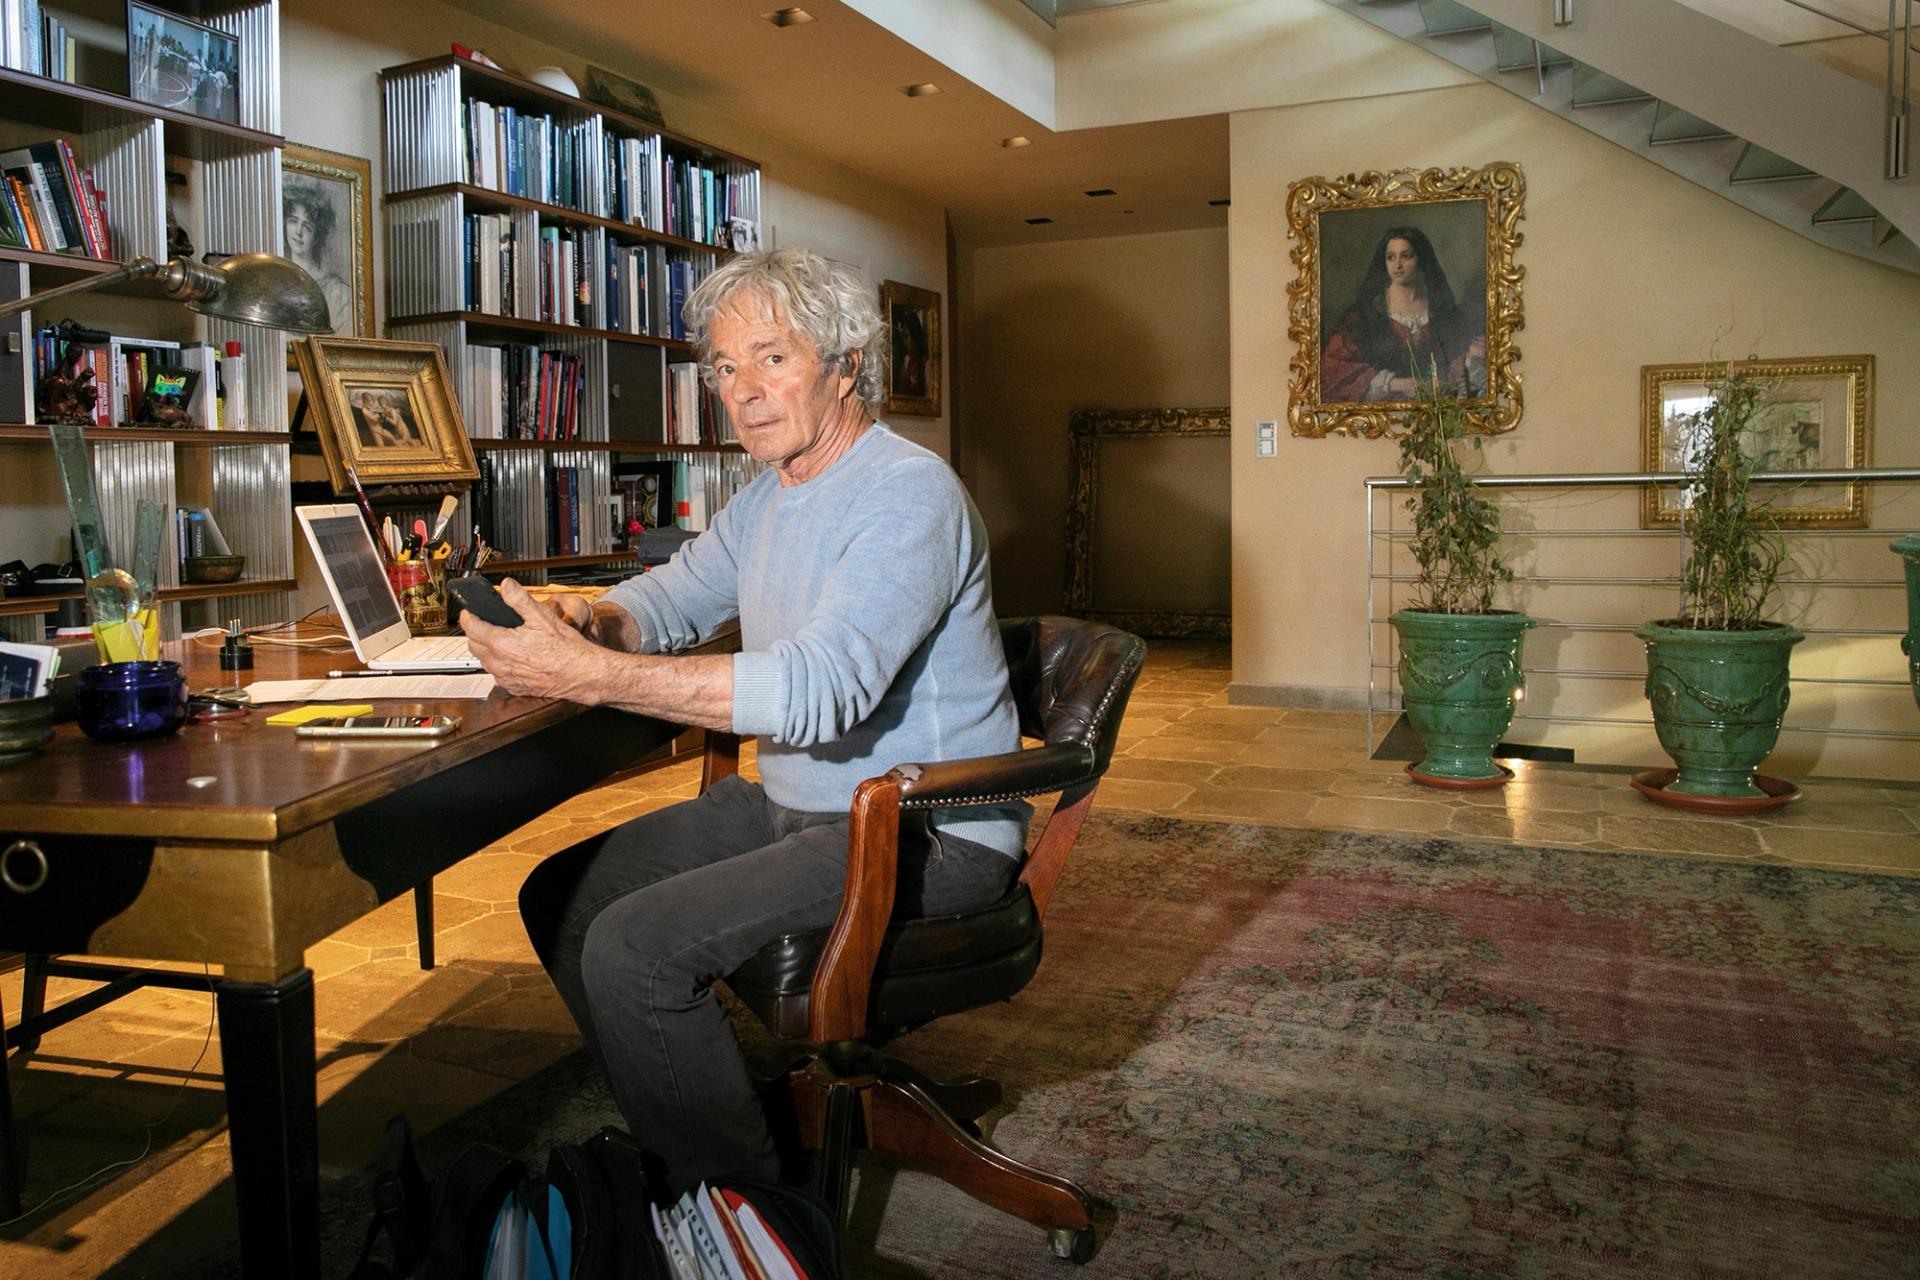 Giuliano Ruffini at his home in 2020. Photo: Baptiste Giroudon/Paris Match via Getty Images)